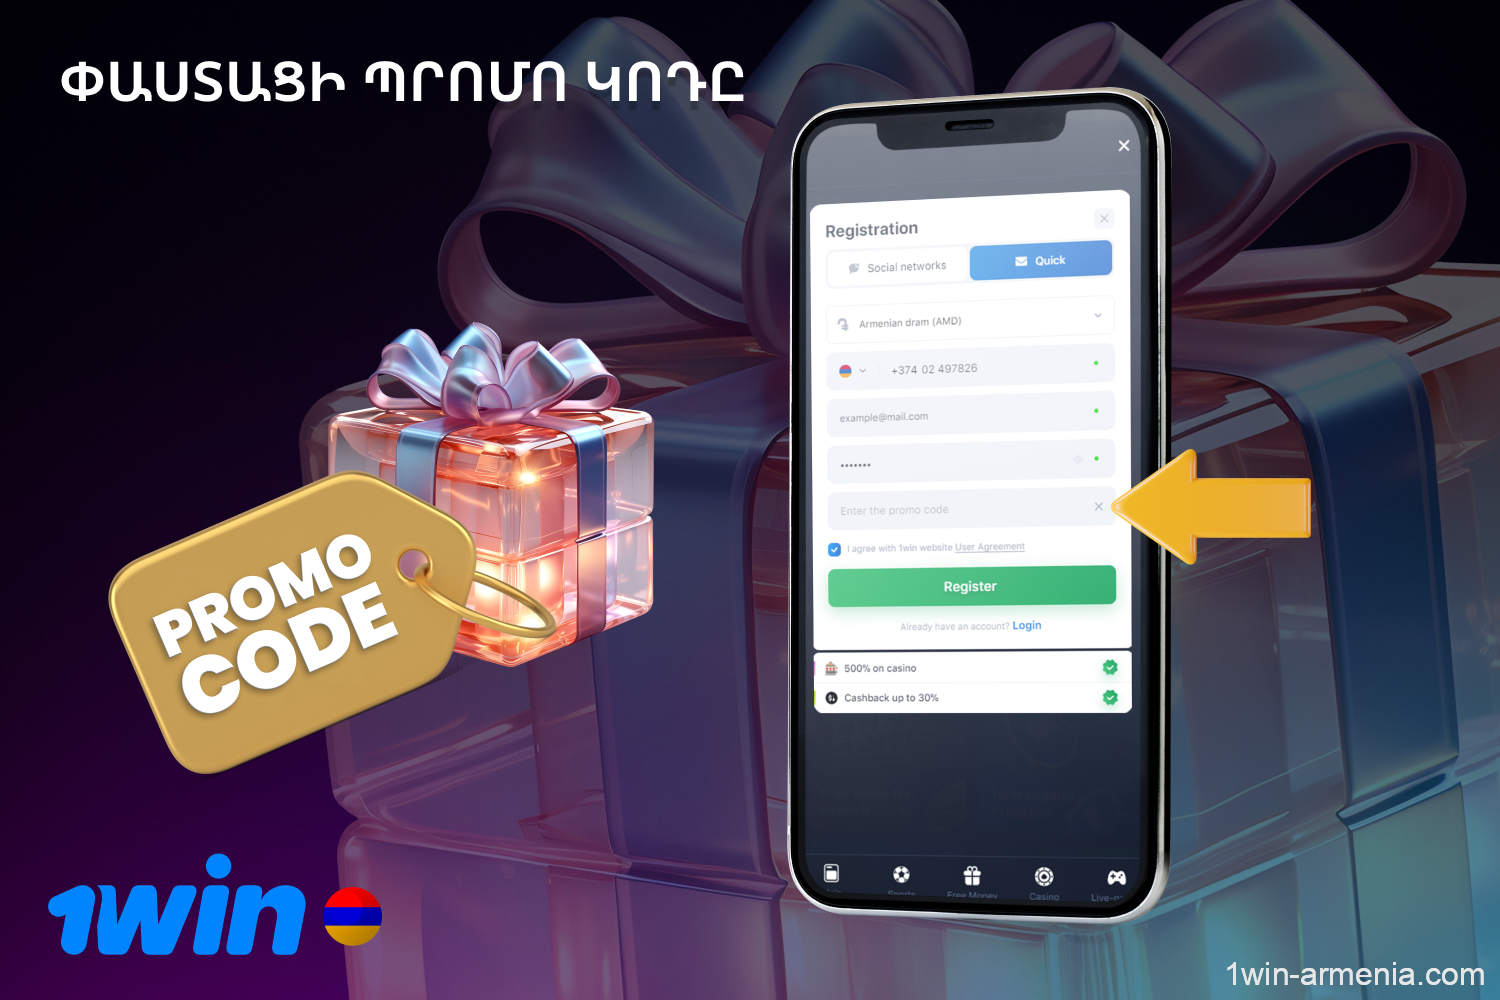 New players at 1win Armenia casino can use a special voucher to get a bonus